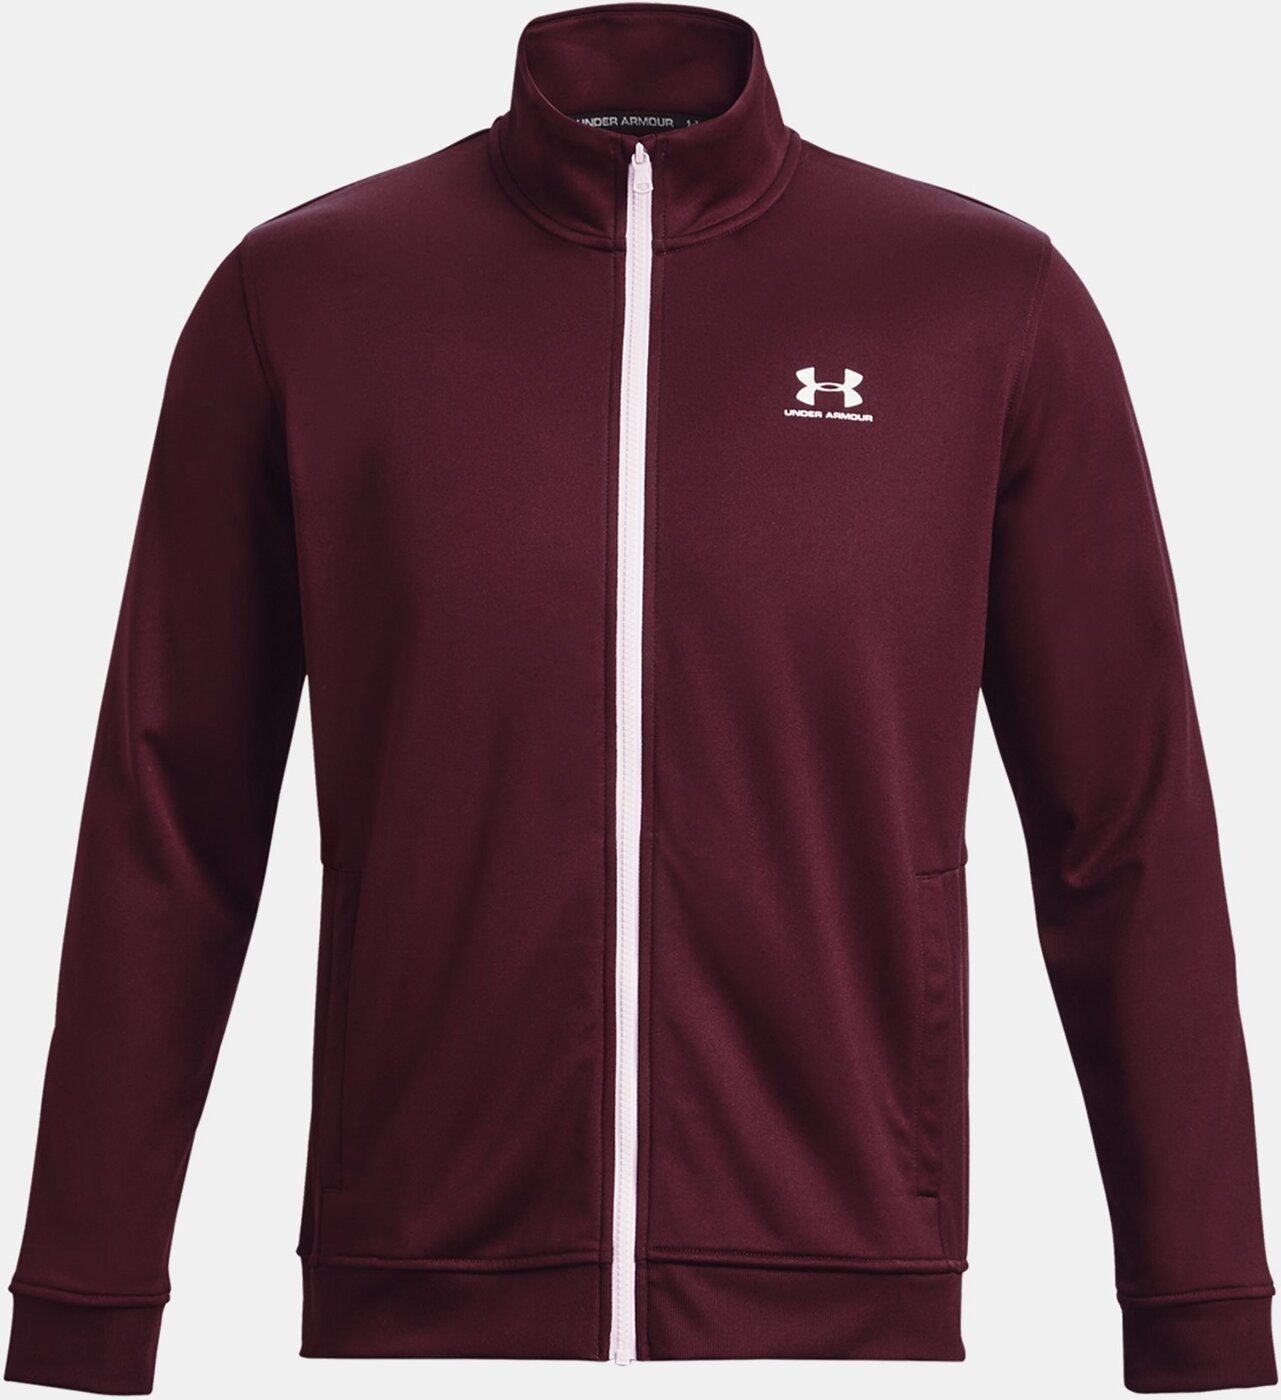 Under Armour® T-Shirt SPORTSTYLE TRICOT JACKET DARK MAROON Bordeaux Rot